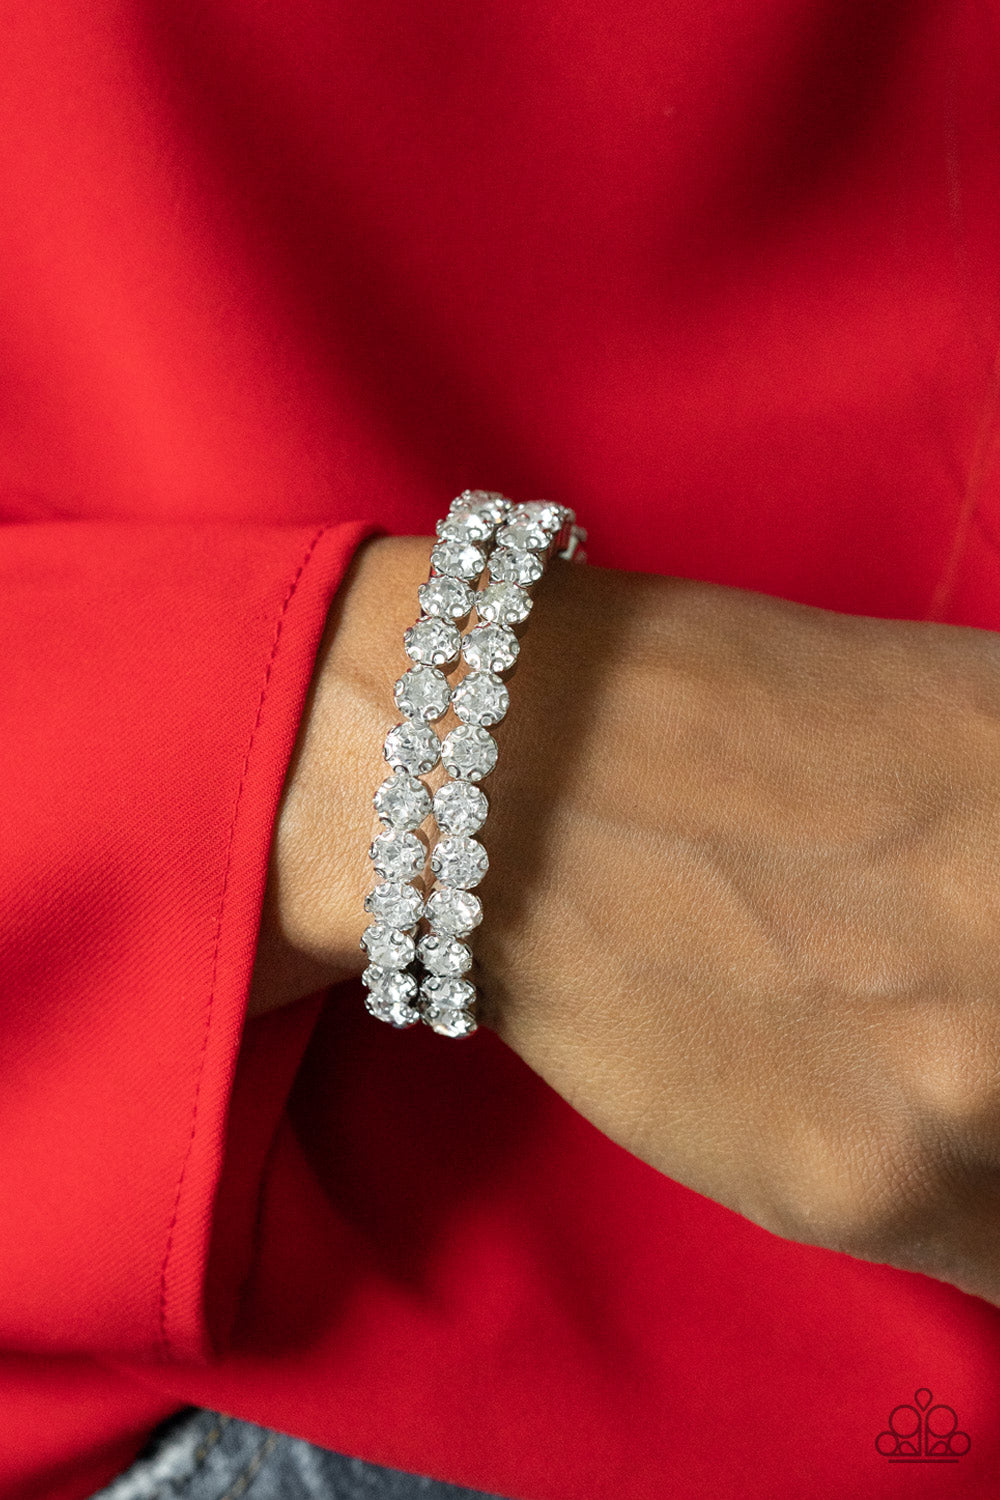 Megawatt Majesty White Cuff Bracelet - Paparazzi Accessories  Encased in sleek silver fittings, two oversized rows of glassy white rhinestones stack into a blinding cuff around the wrist for a jaw-dropping look.  Sold as one individual bracelet.